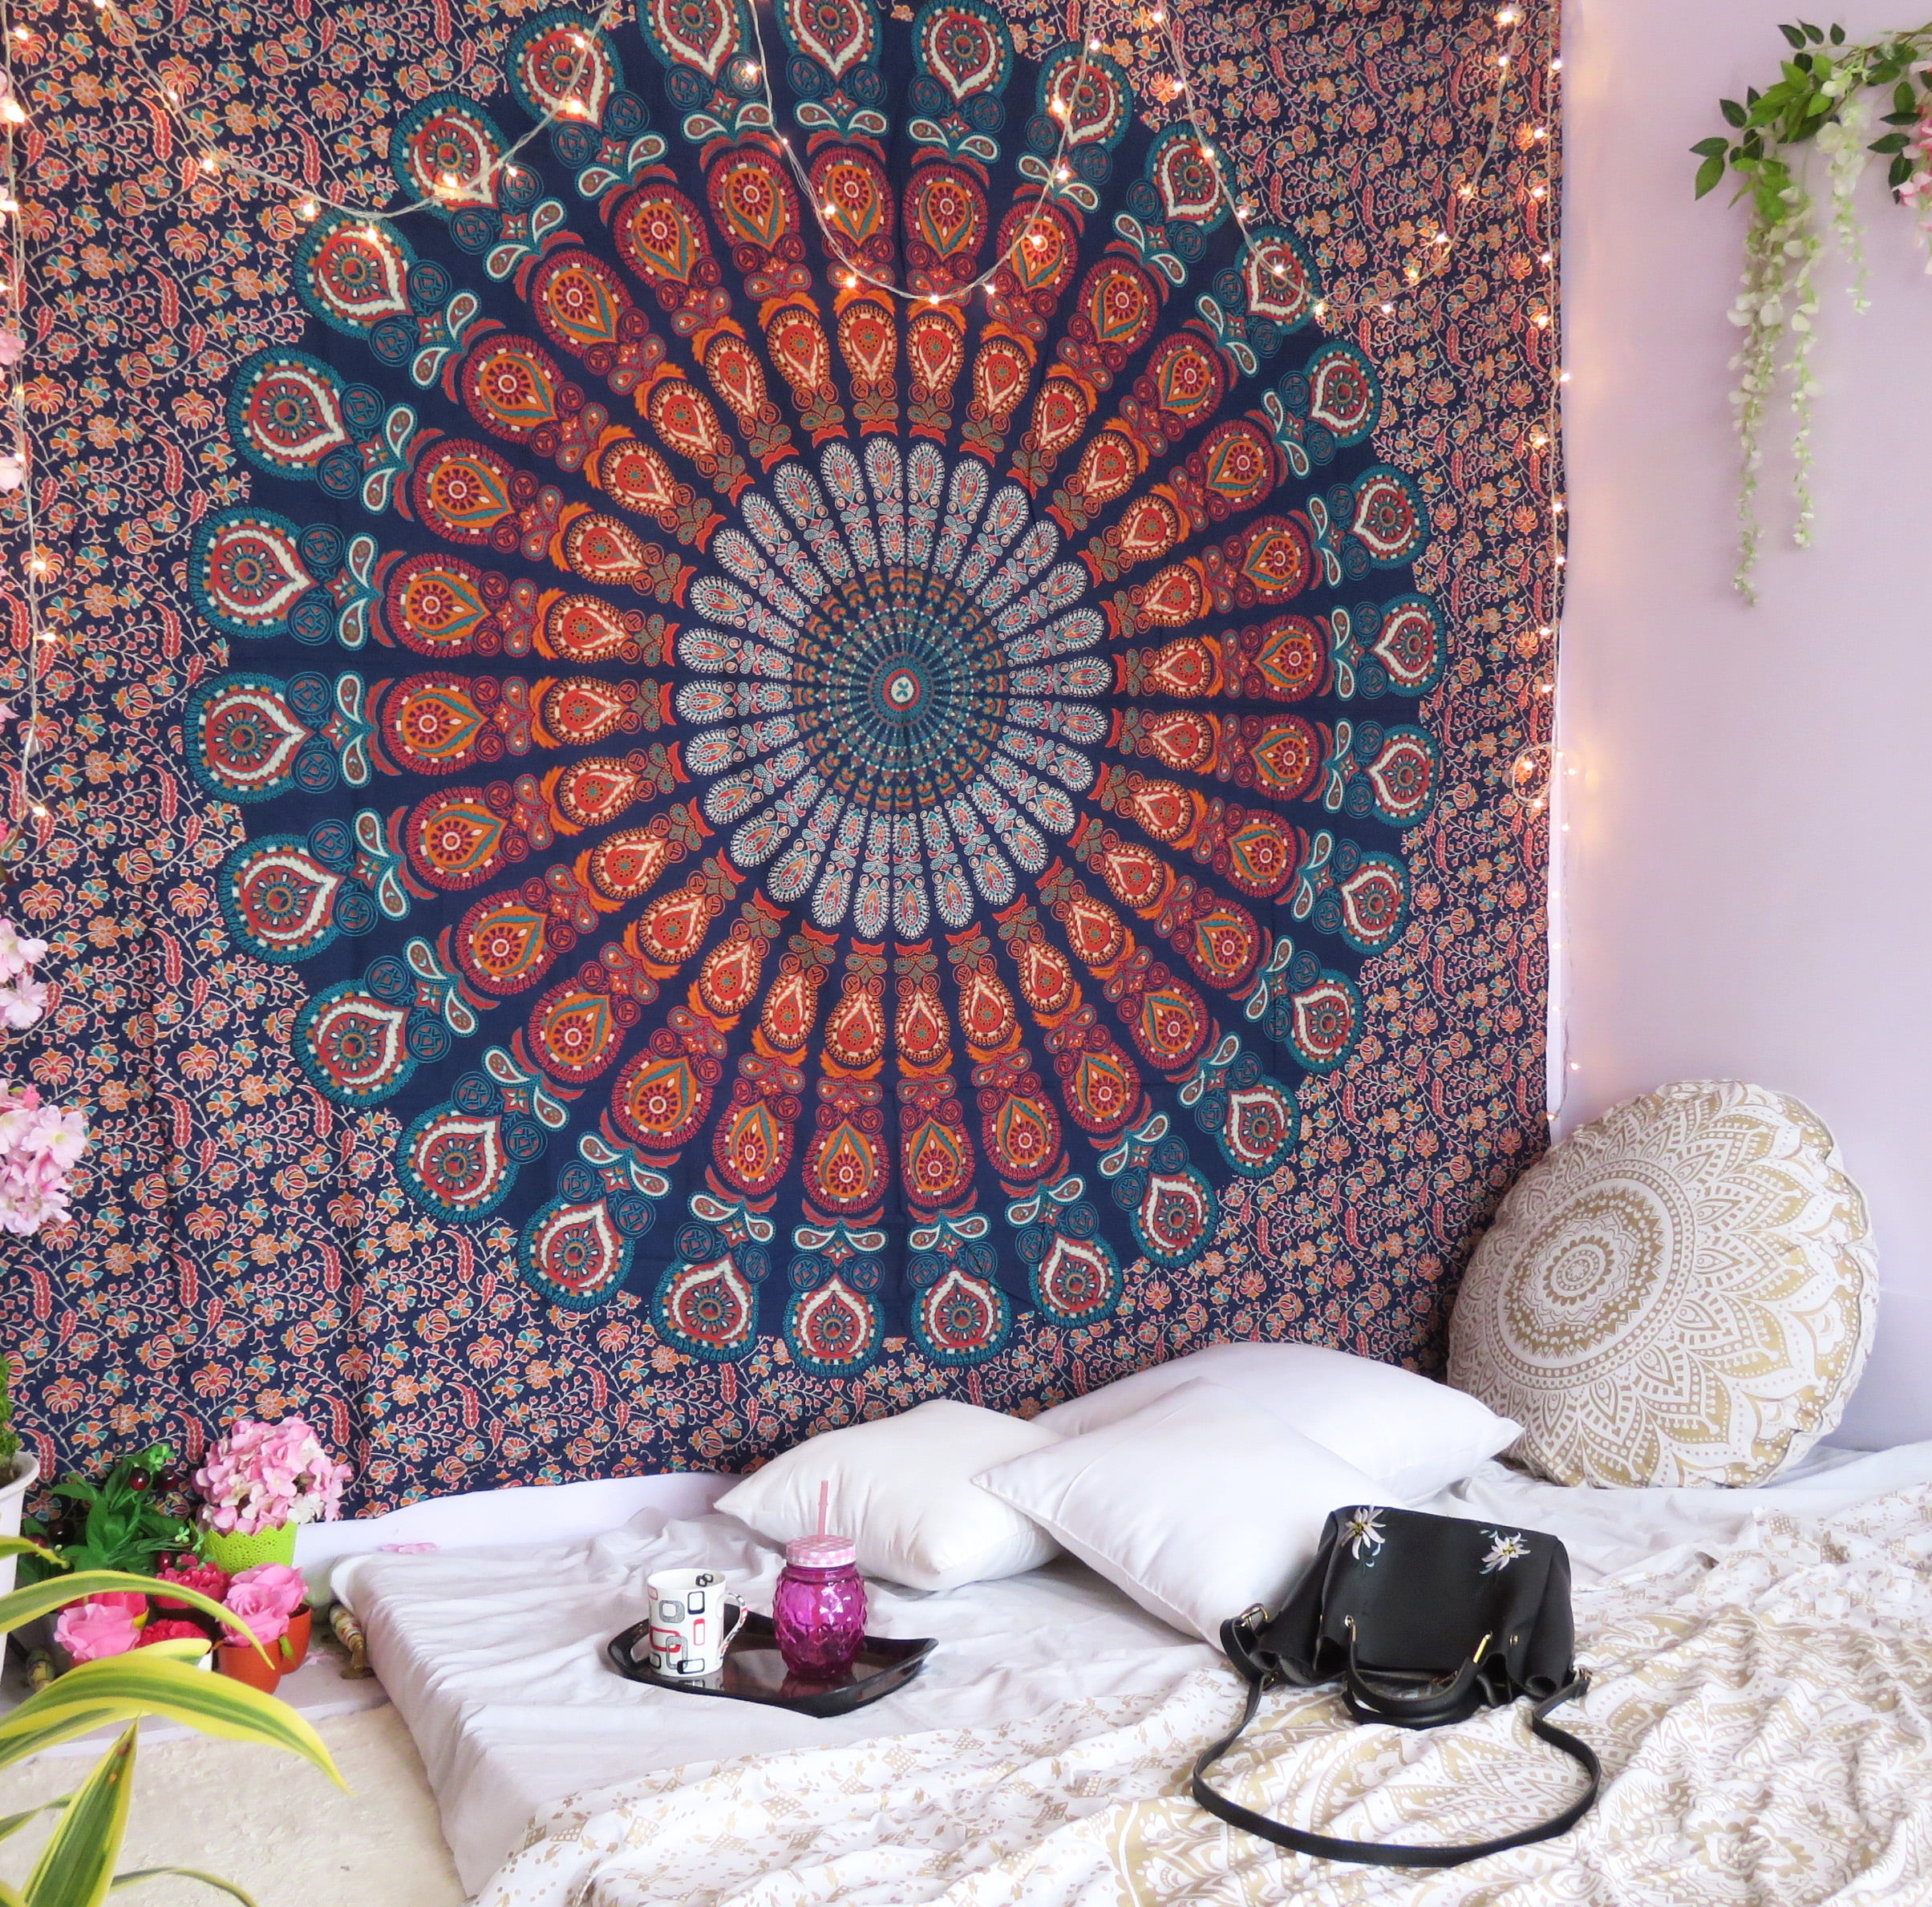 Details about   Indian Mandala Bohemian Spider Wall Hanging Dorm Décor Yoga Mat Posters Tapestry 